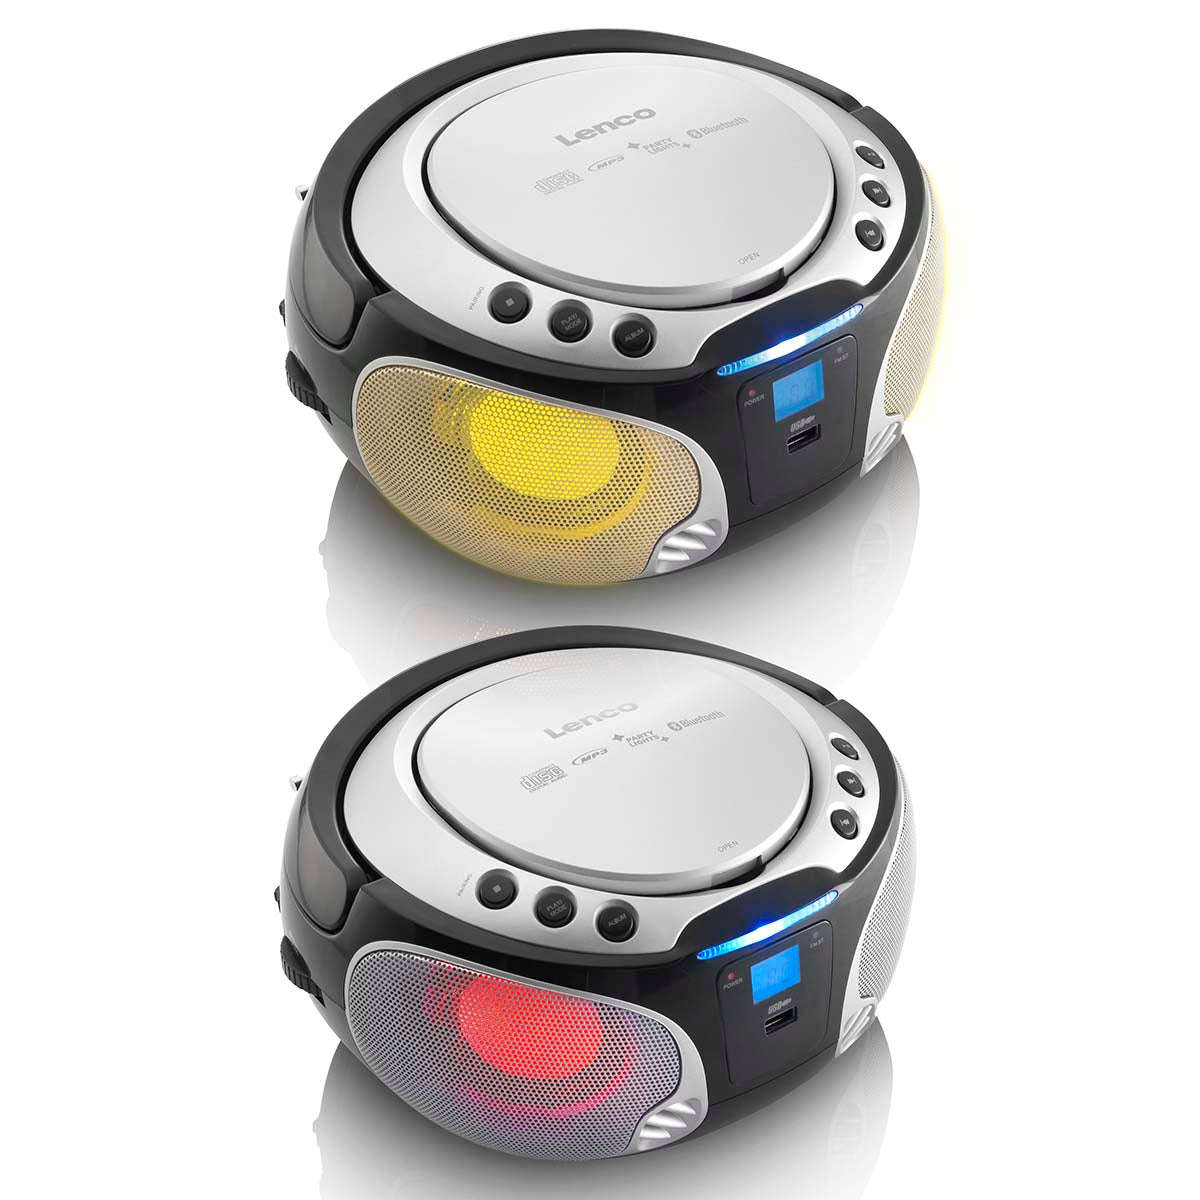 SCD-550SI Tragbares UKW-Radio CD/MP3/USB/Bluetooth-Player® mit LED-Beleuchtung Silber